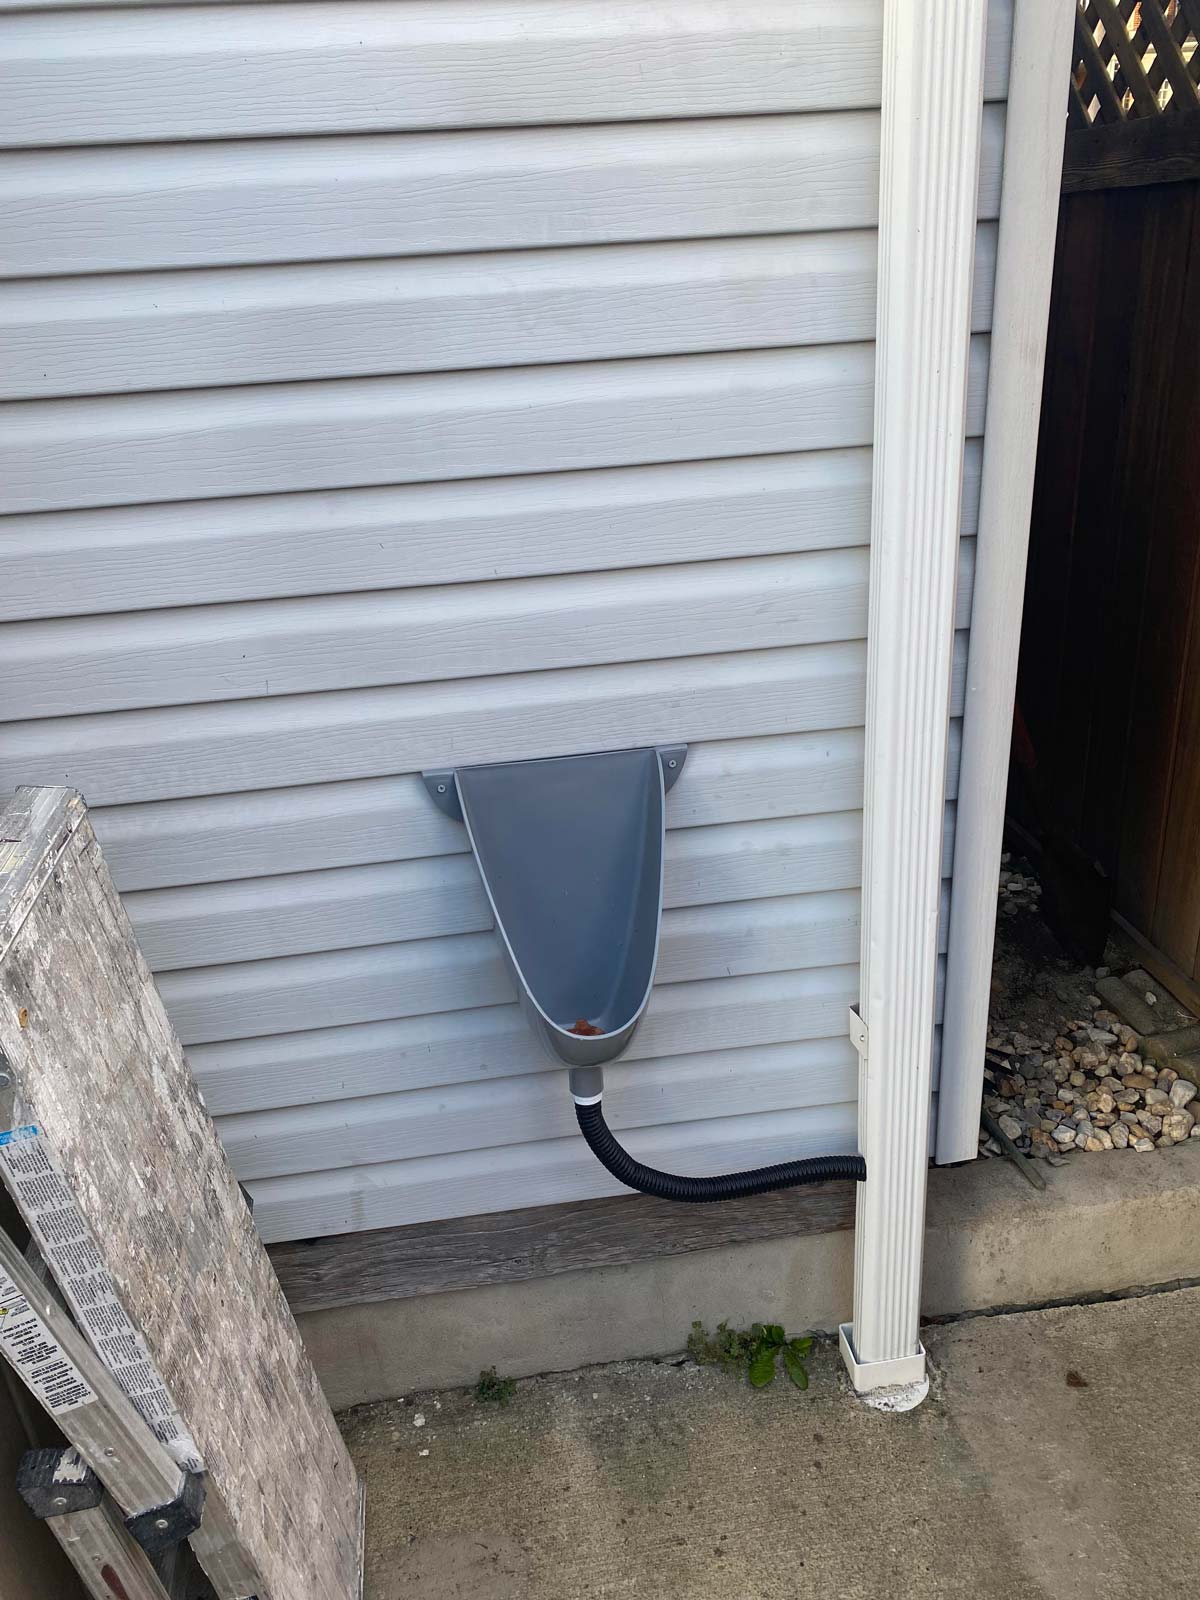 My mom's boyfriend built an outdoor urinal so he doesn’t have to use the fence anymore